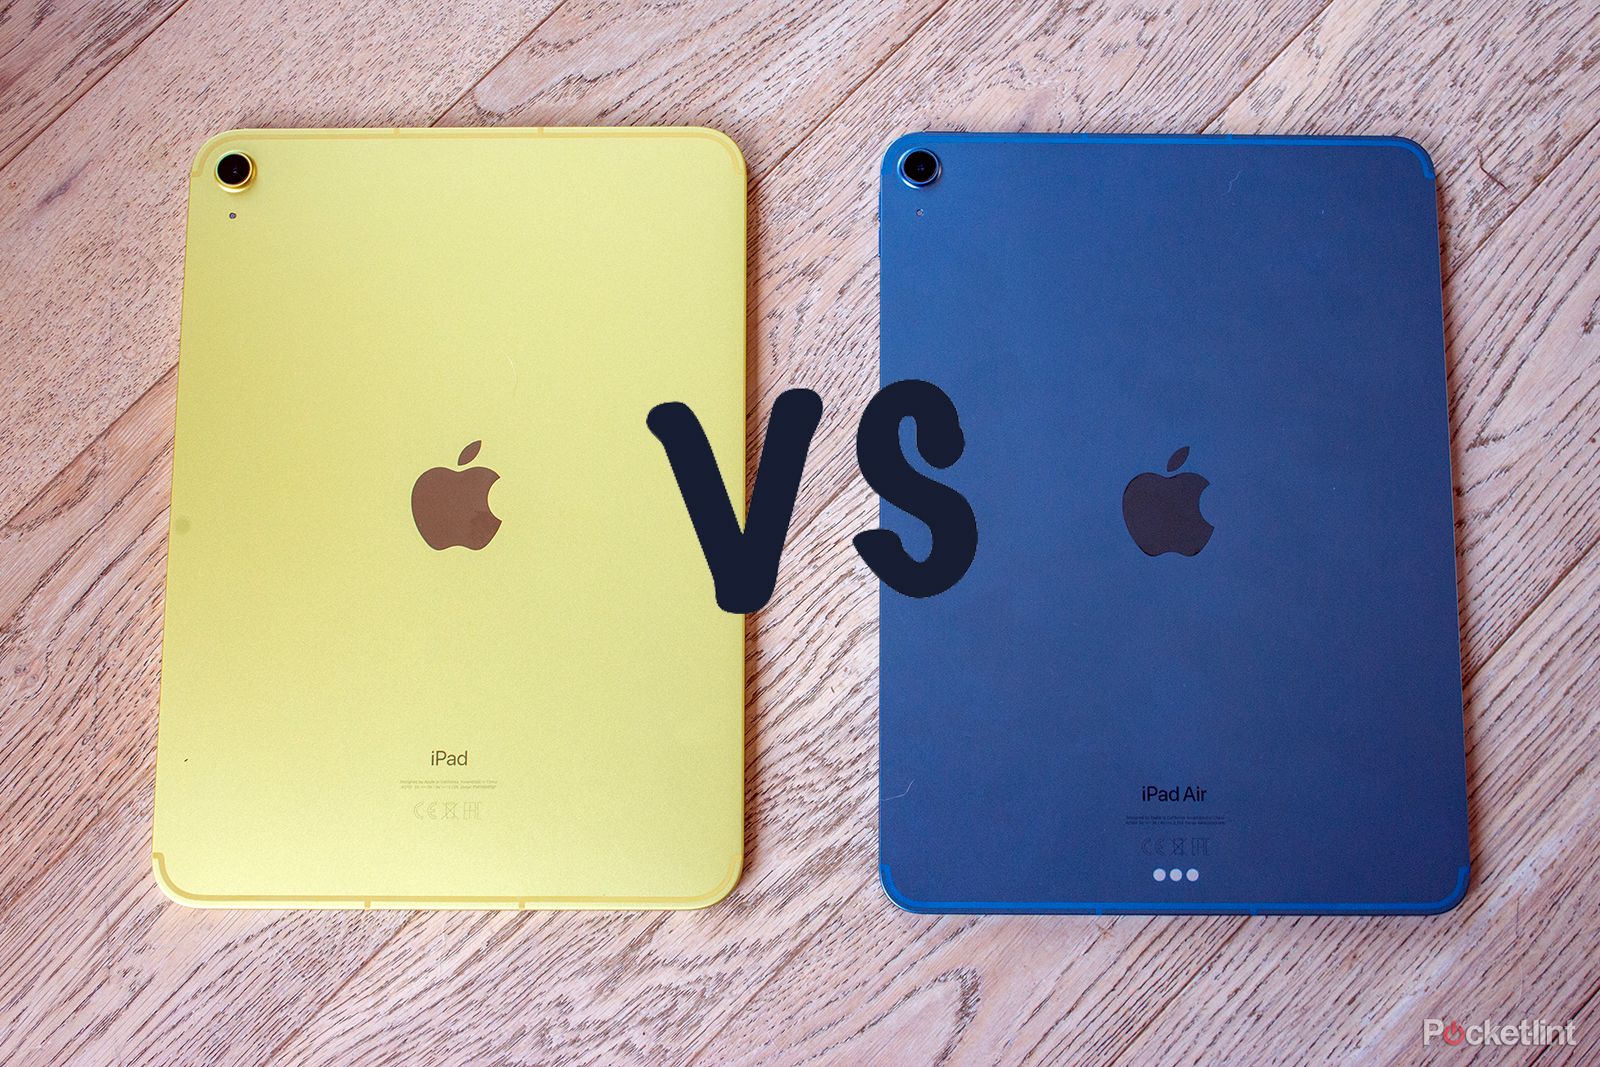 iPad Air 5 vs iPad Pro: Which is more powerful?